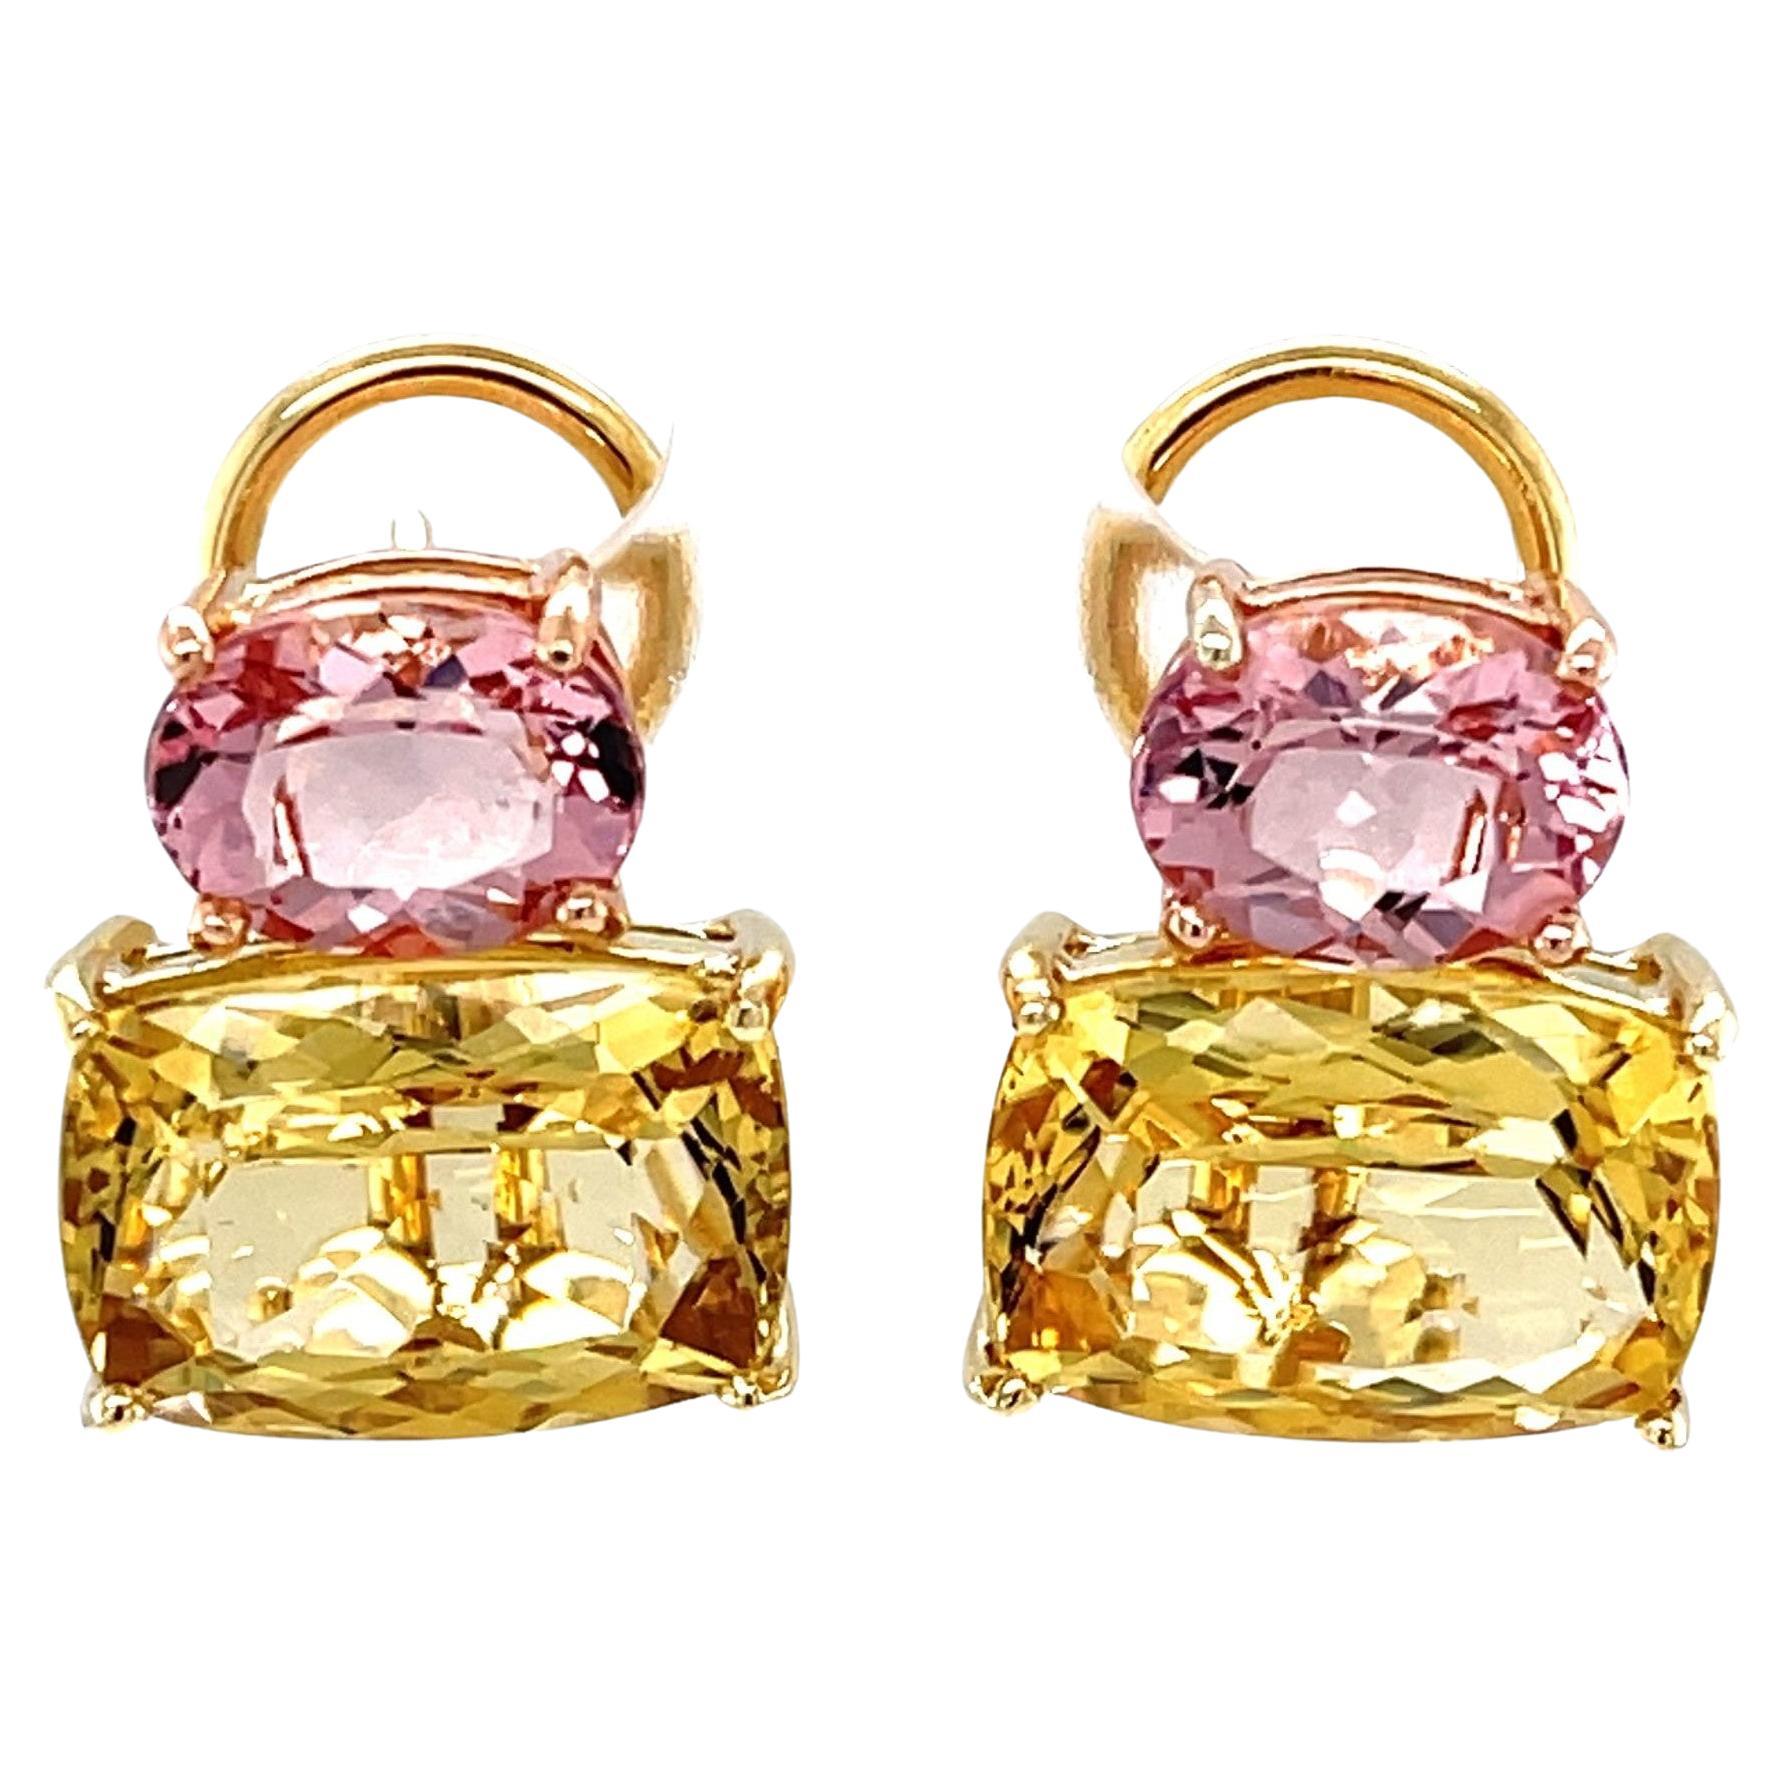 Golden Beryl and Morganite Earrings in 18k Yellow Gold with French Clip Backs 